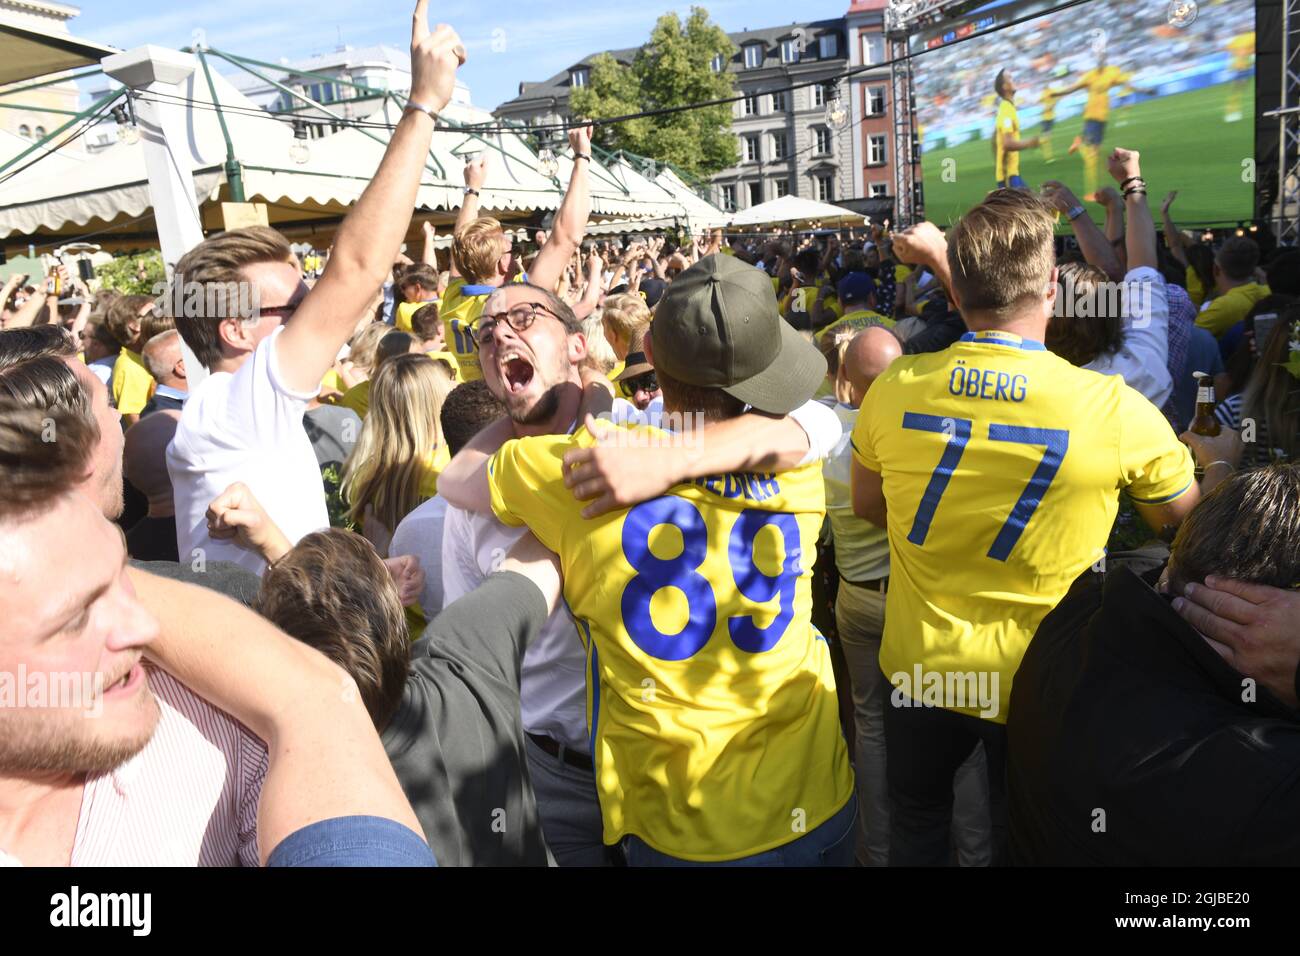 Swedish soccer fans celebrate after Sweden scored against Mexico during the Russia 2018 World Cup Group F soccer match, as they watch the match on a big screen outdoors at Norra Bantorget in central Stockholm, Sweden, on June 27, 2018. Photo: Fredrik Sandberg / TT / code 10080  Stock Photo